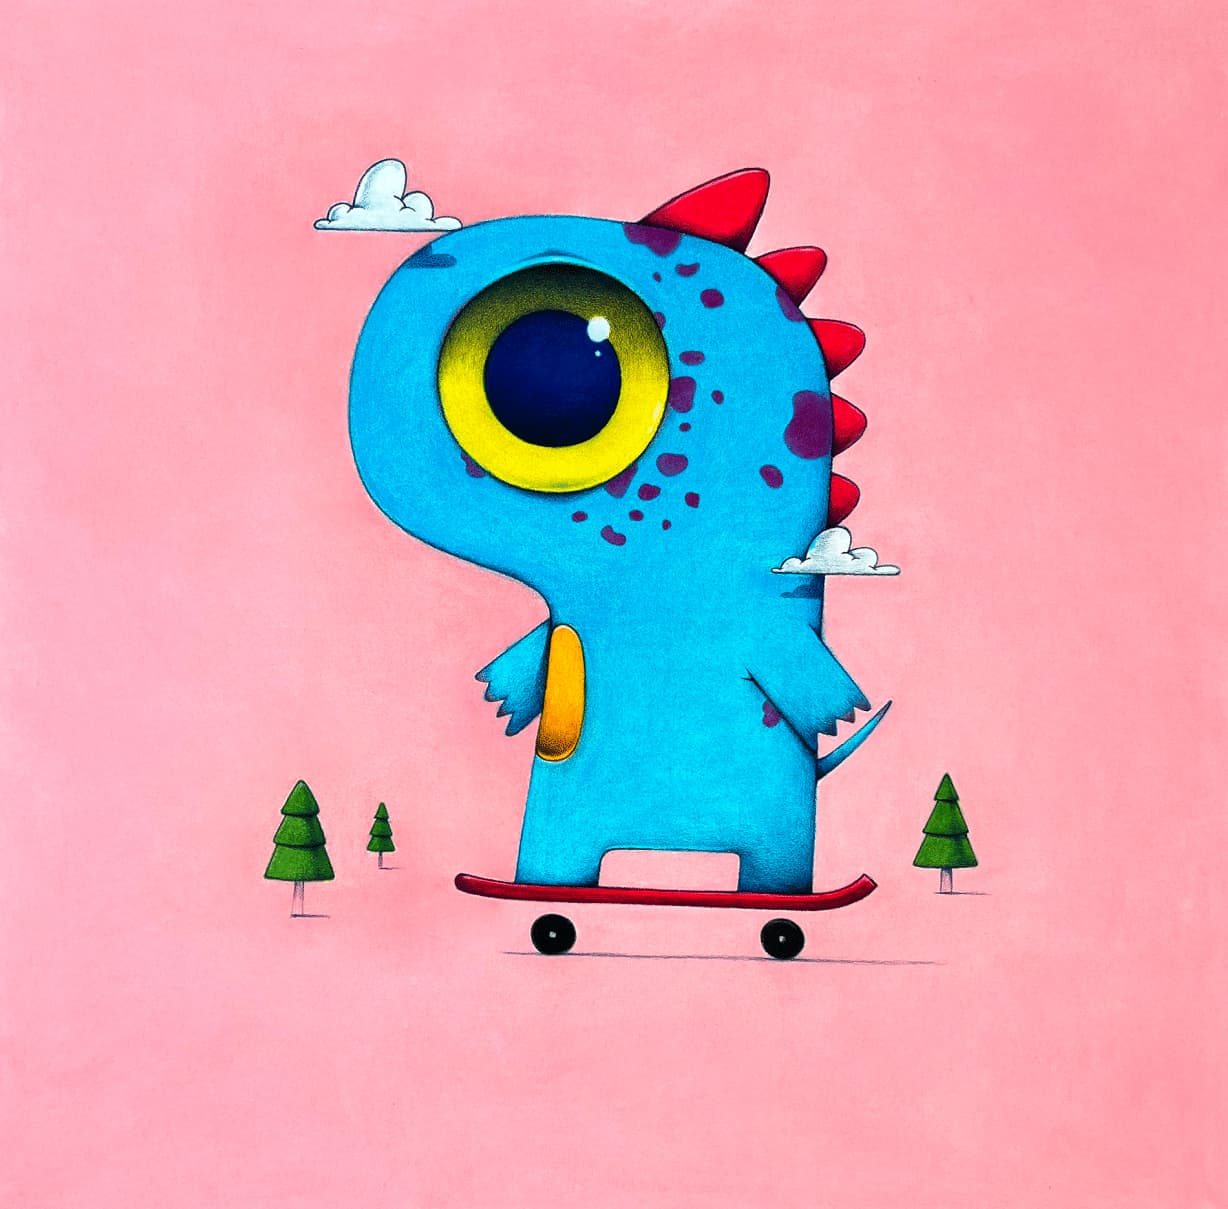 Oscar Llorens Skater Pastel and colored pencils on paper on wood